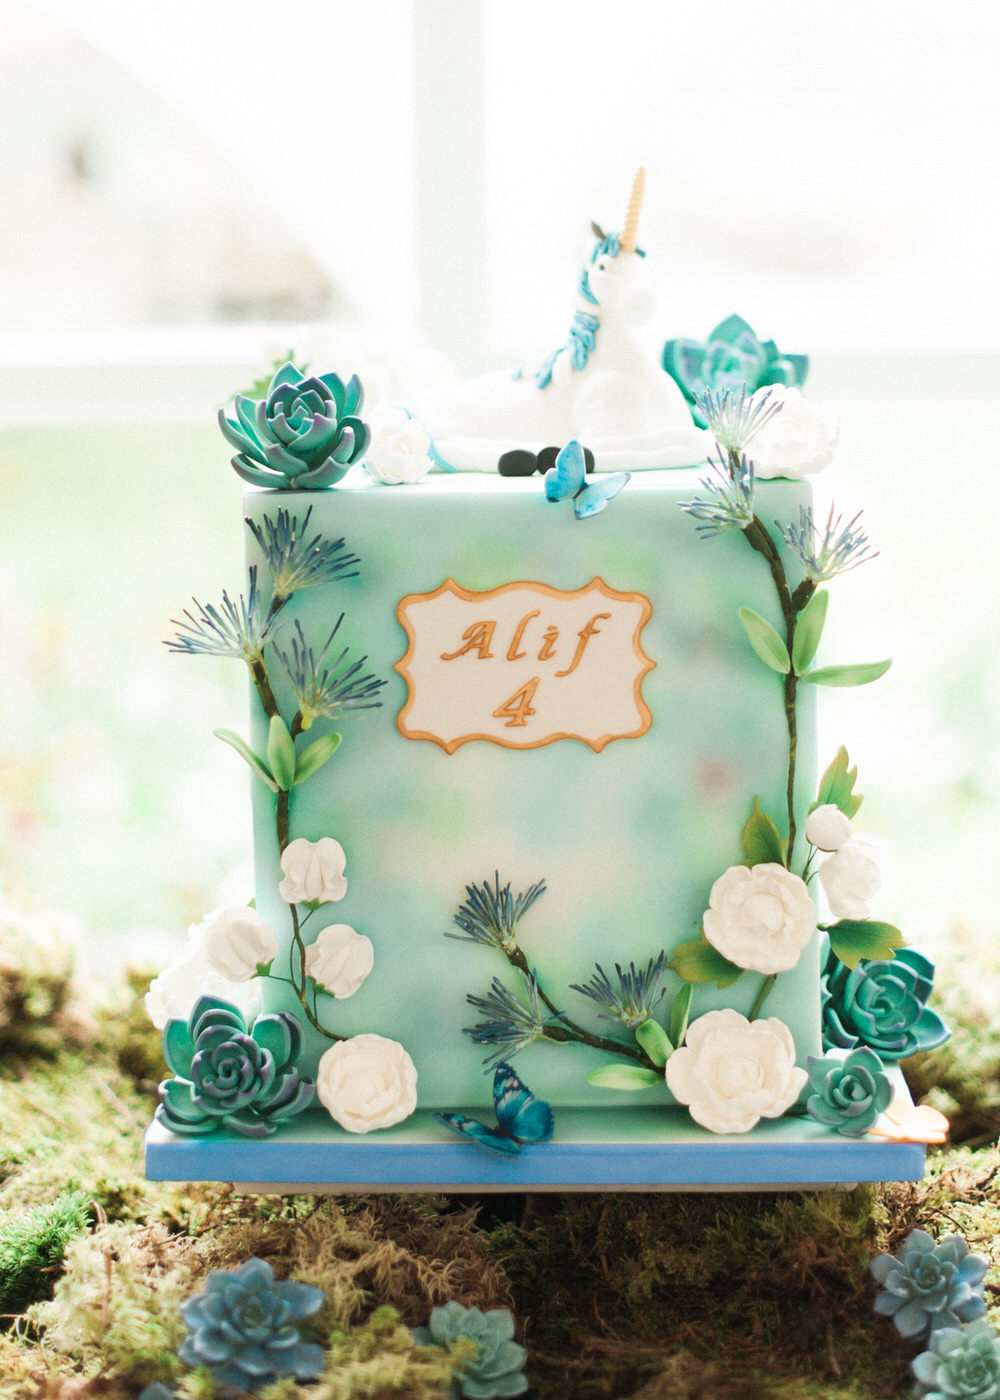 Floral Birthday Cakes | Trio Of Cakes | Midsummer Nights Dream Cakes | A Midsummer nights dream inspired children's birthday party with stunning floral, fairy entertainment, crafts and a picnic. Photos by Kate Nielen